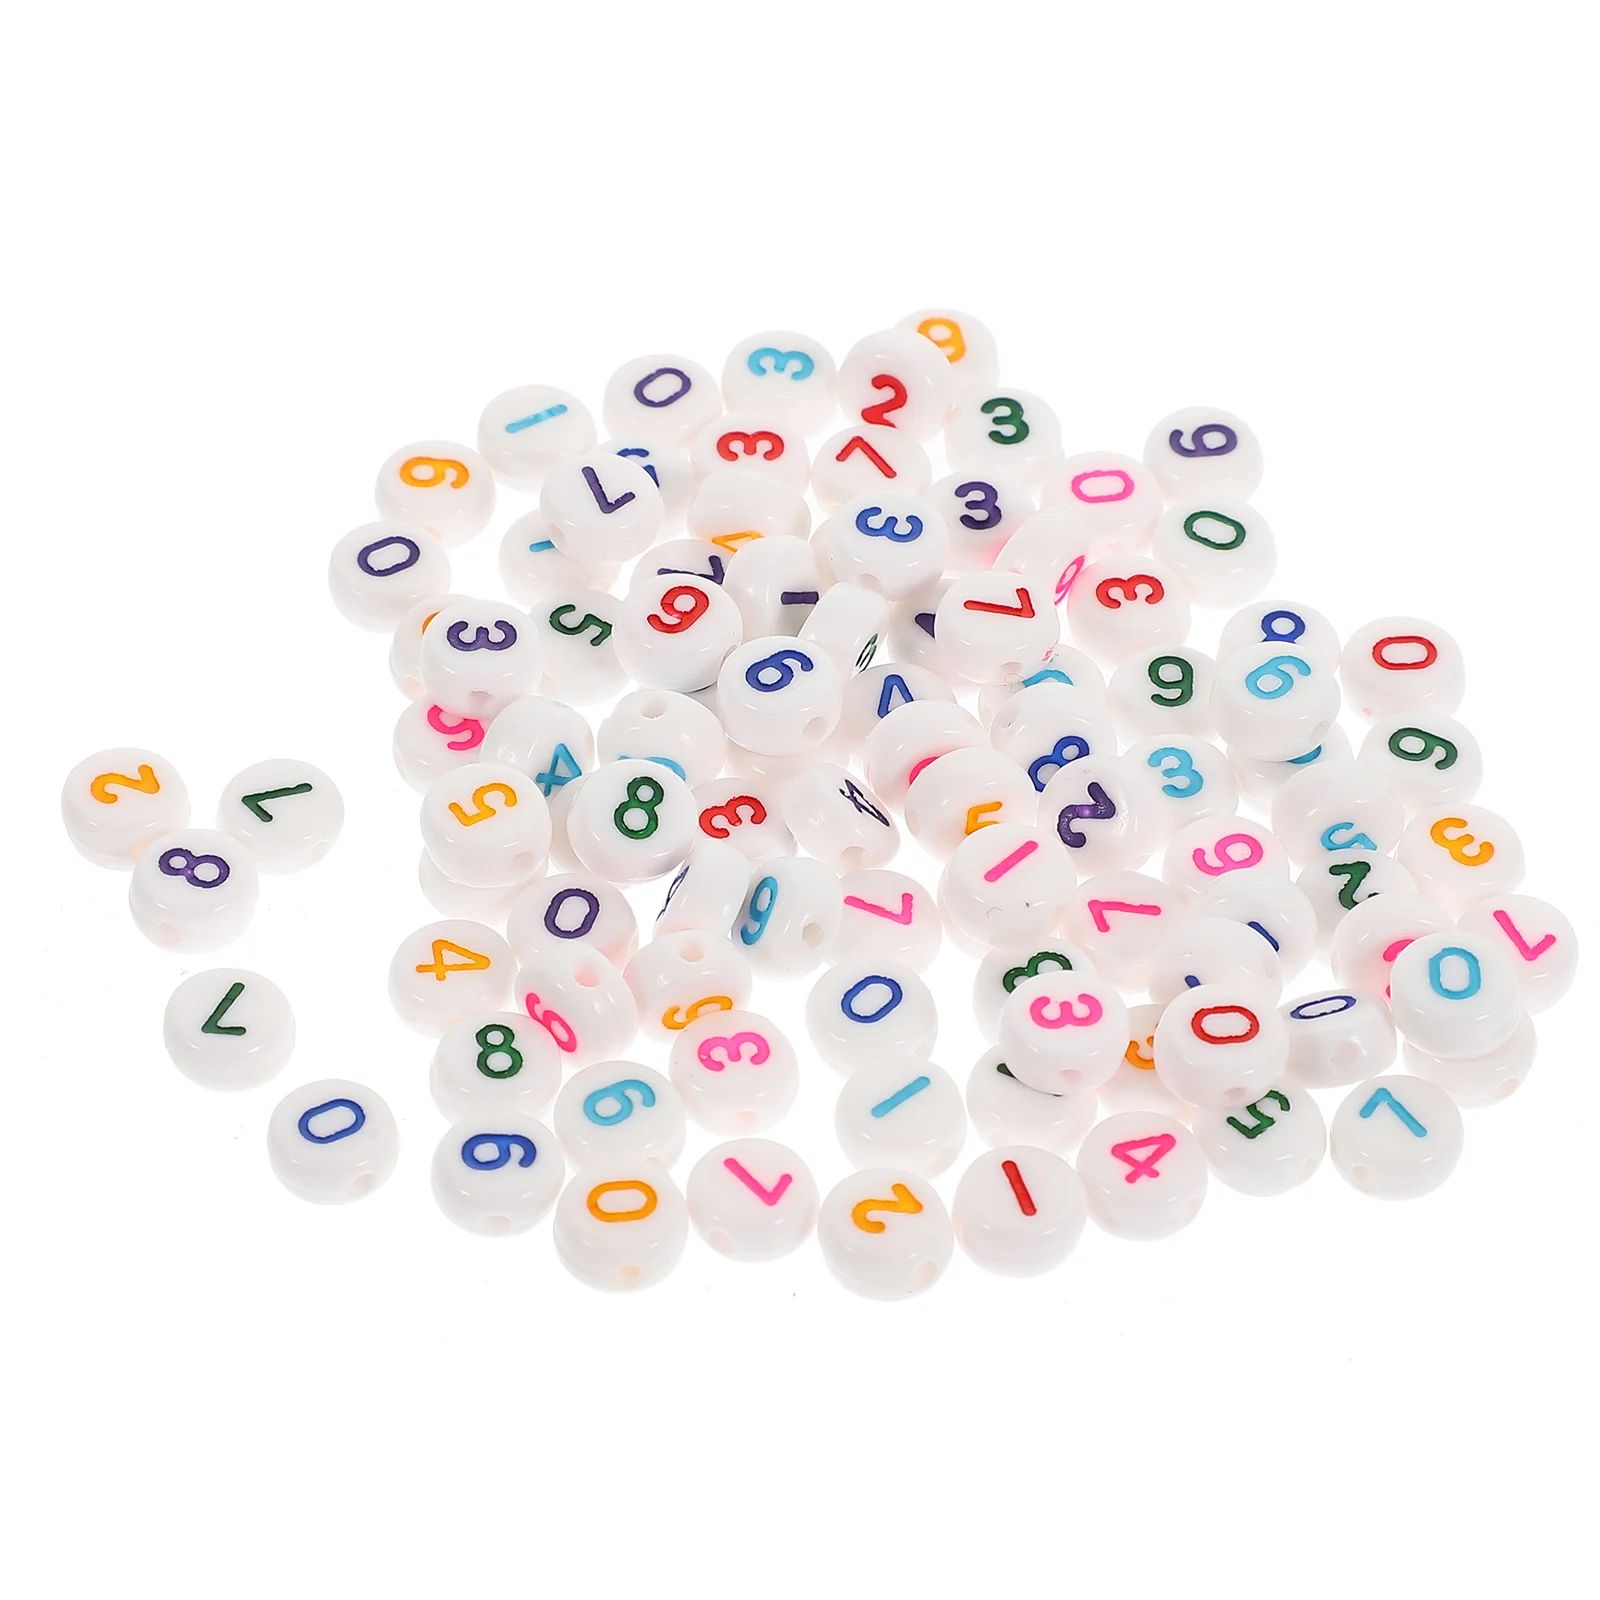 

100 Pcs Keychain DIY Acrylic Spacer Beads Loose Scattered Jewelry Making Bracelet Hair Accessory Accessories Number